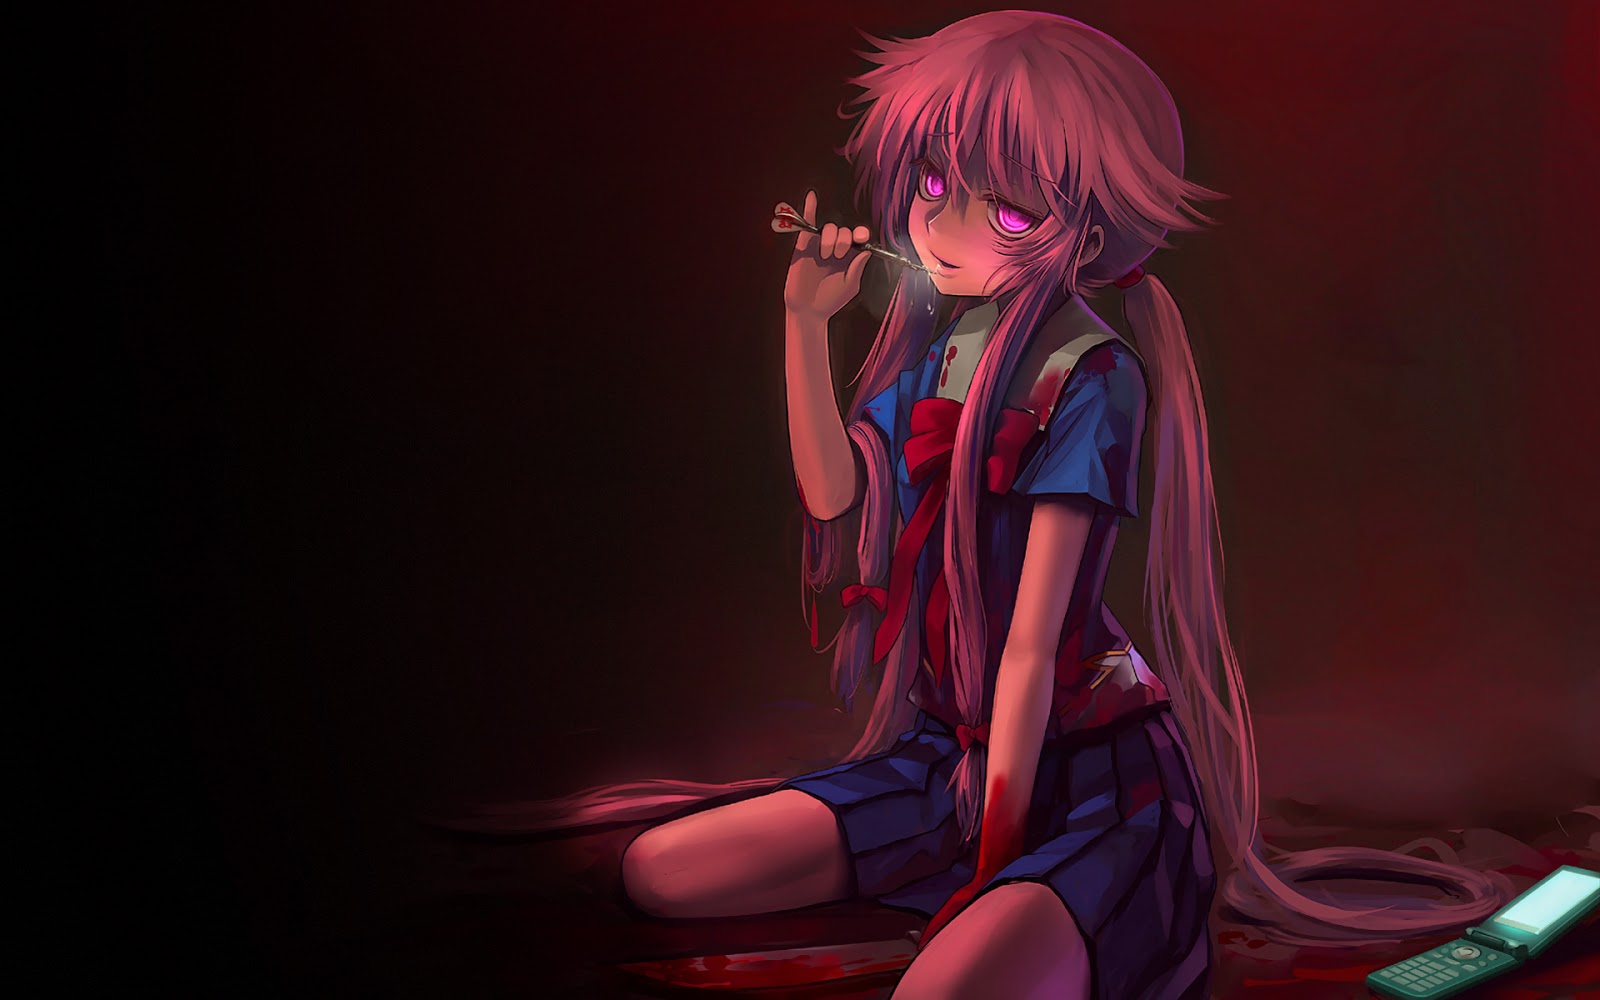 Blond Hair Yandere Males: Top 10 Results
1. Yuno Gasai - wide 11